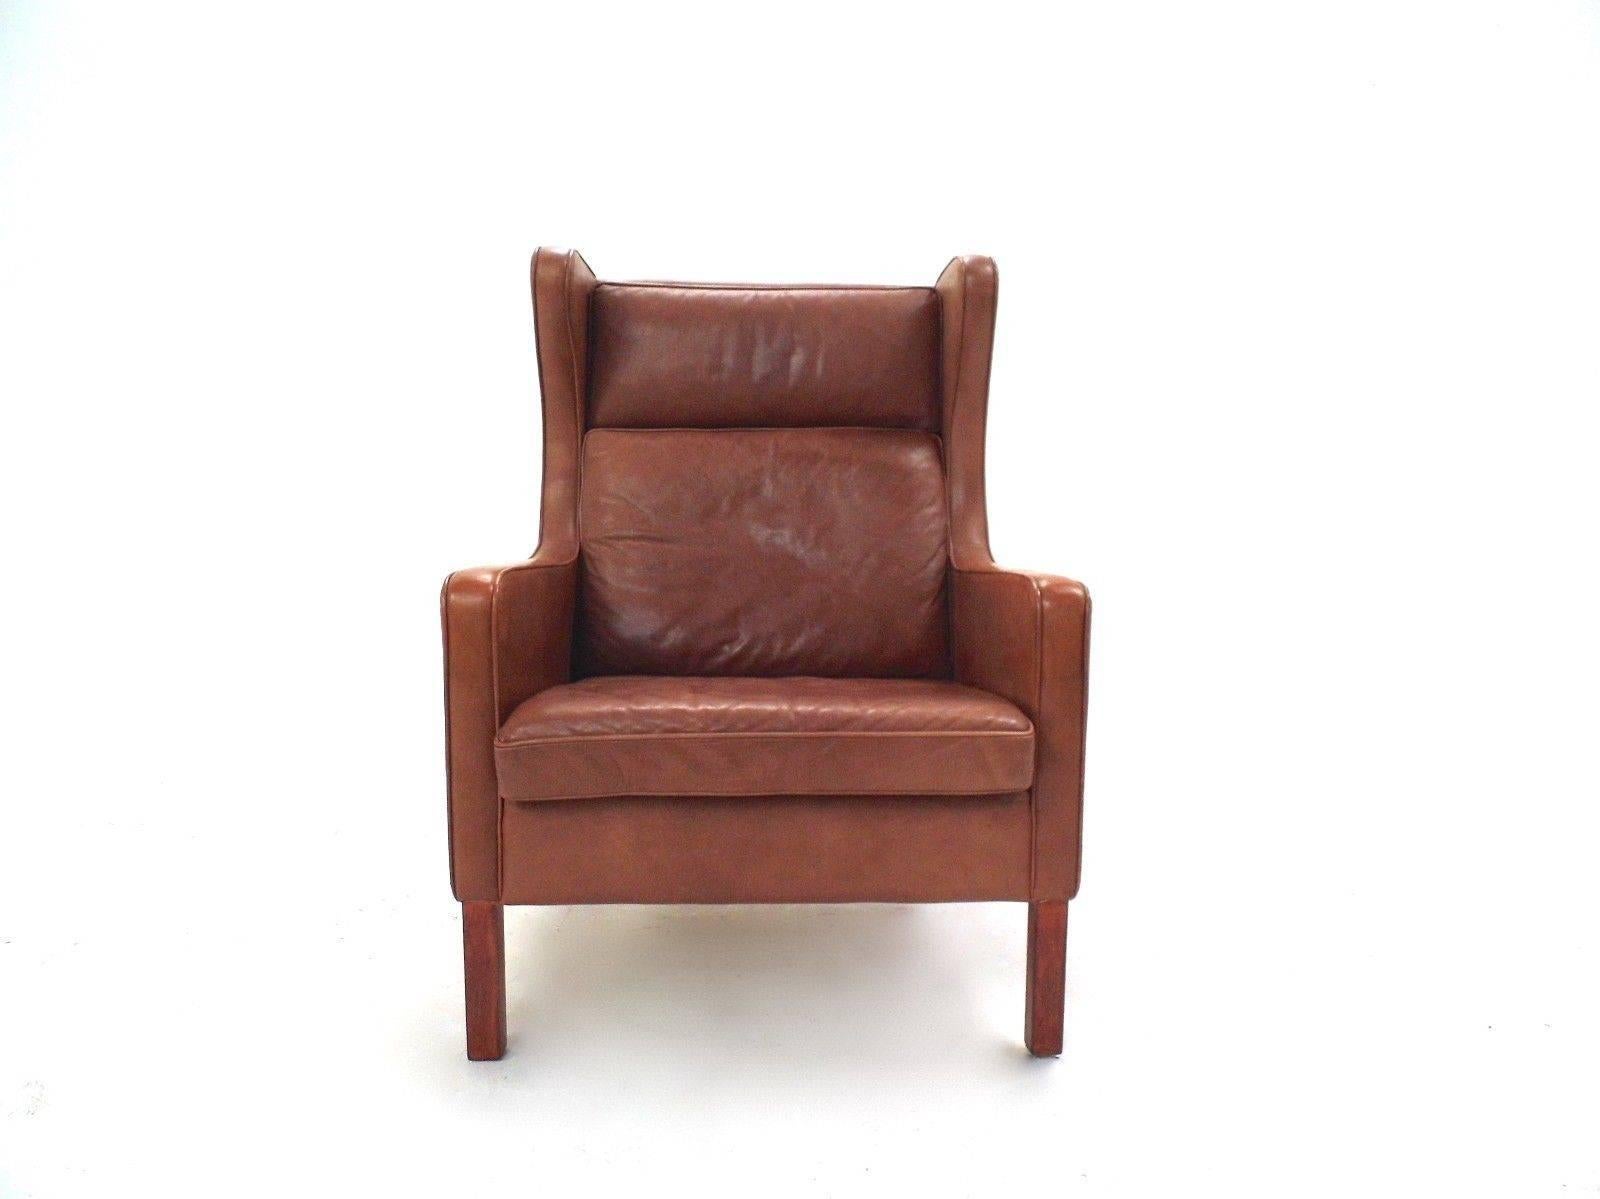 A beautiful chestnut tan brown leather highback armchair by Stouby Polster Mobelfabrik of Denmark, this would make a stylish addition to any living or work area. The chair has a wide seat pad and padded armrests for enhanced comfort. A striking